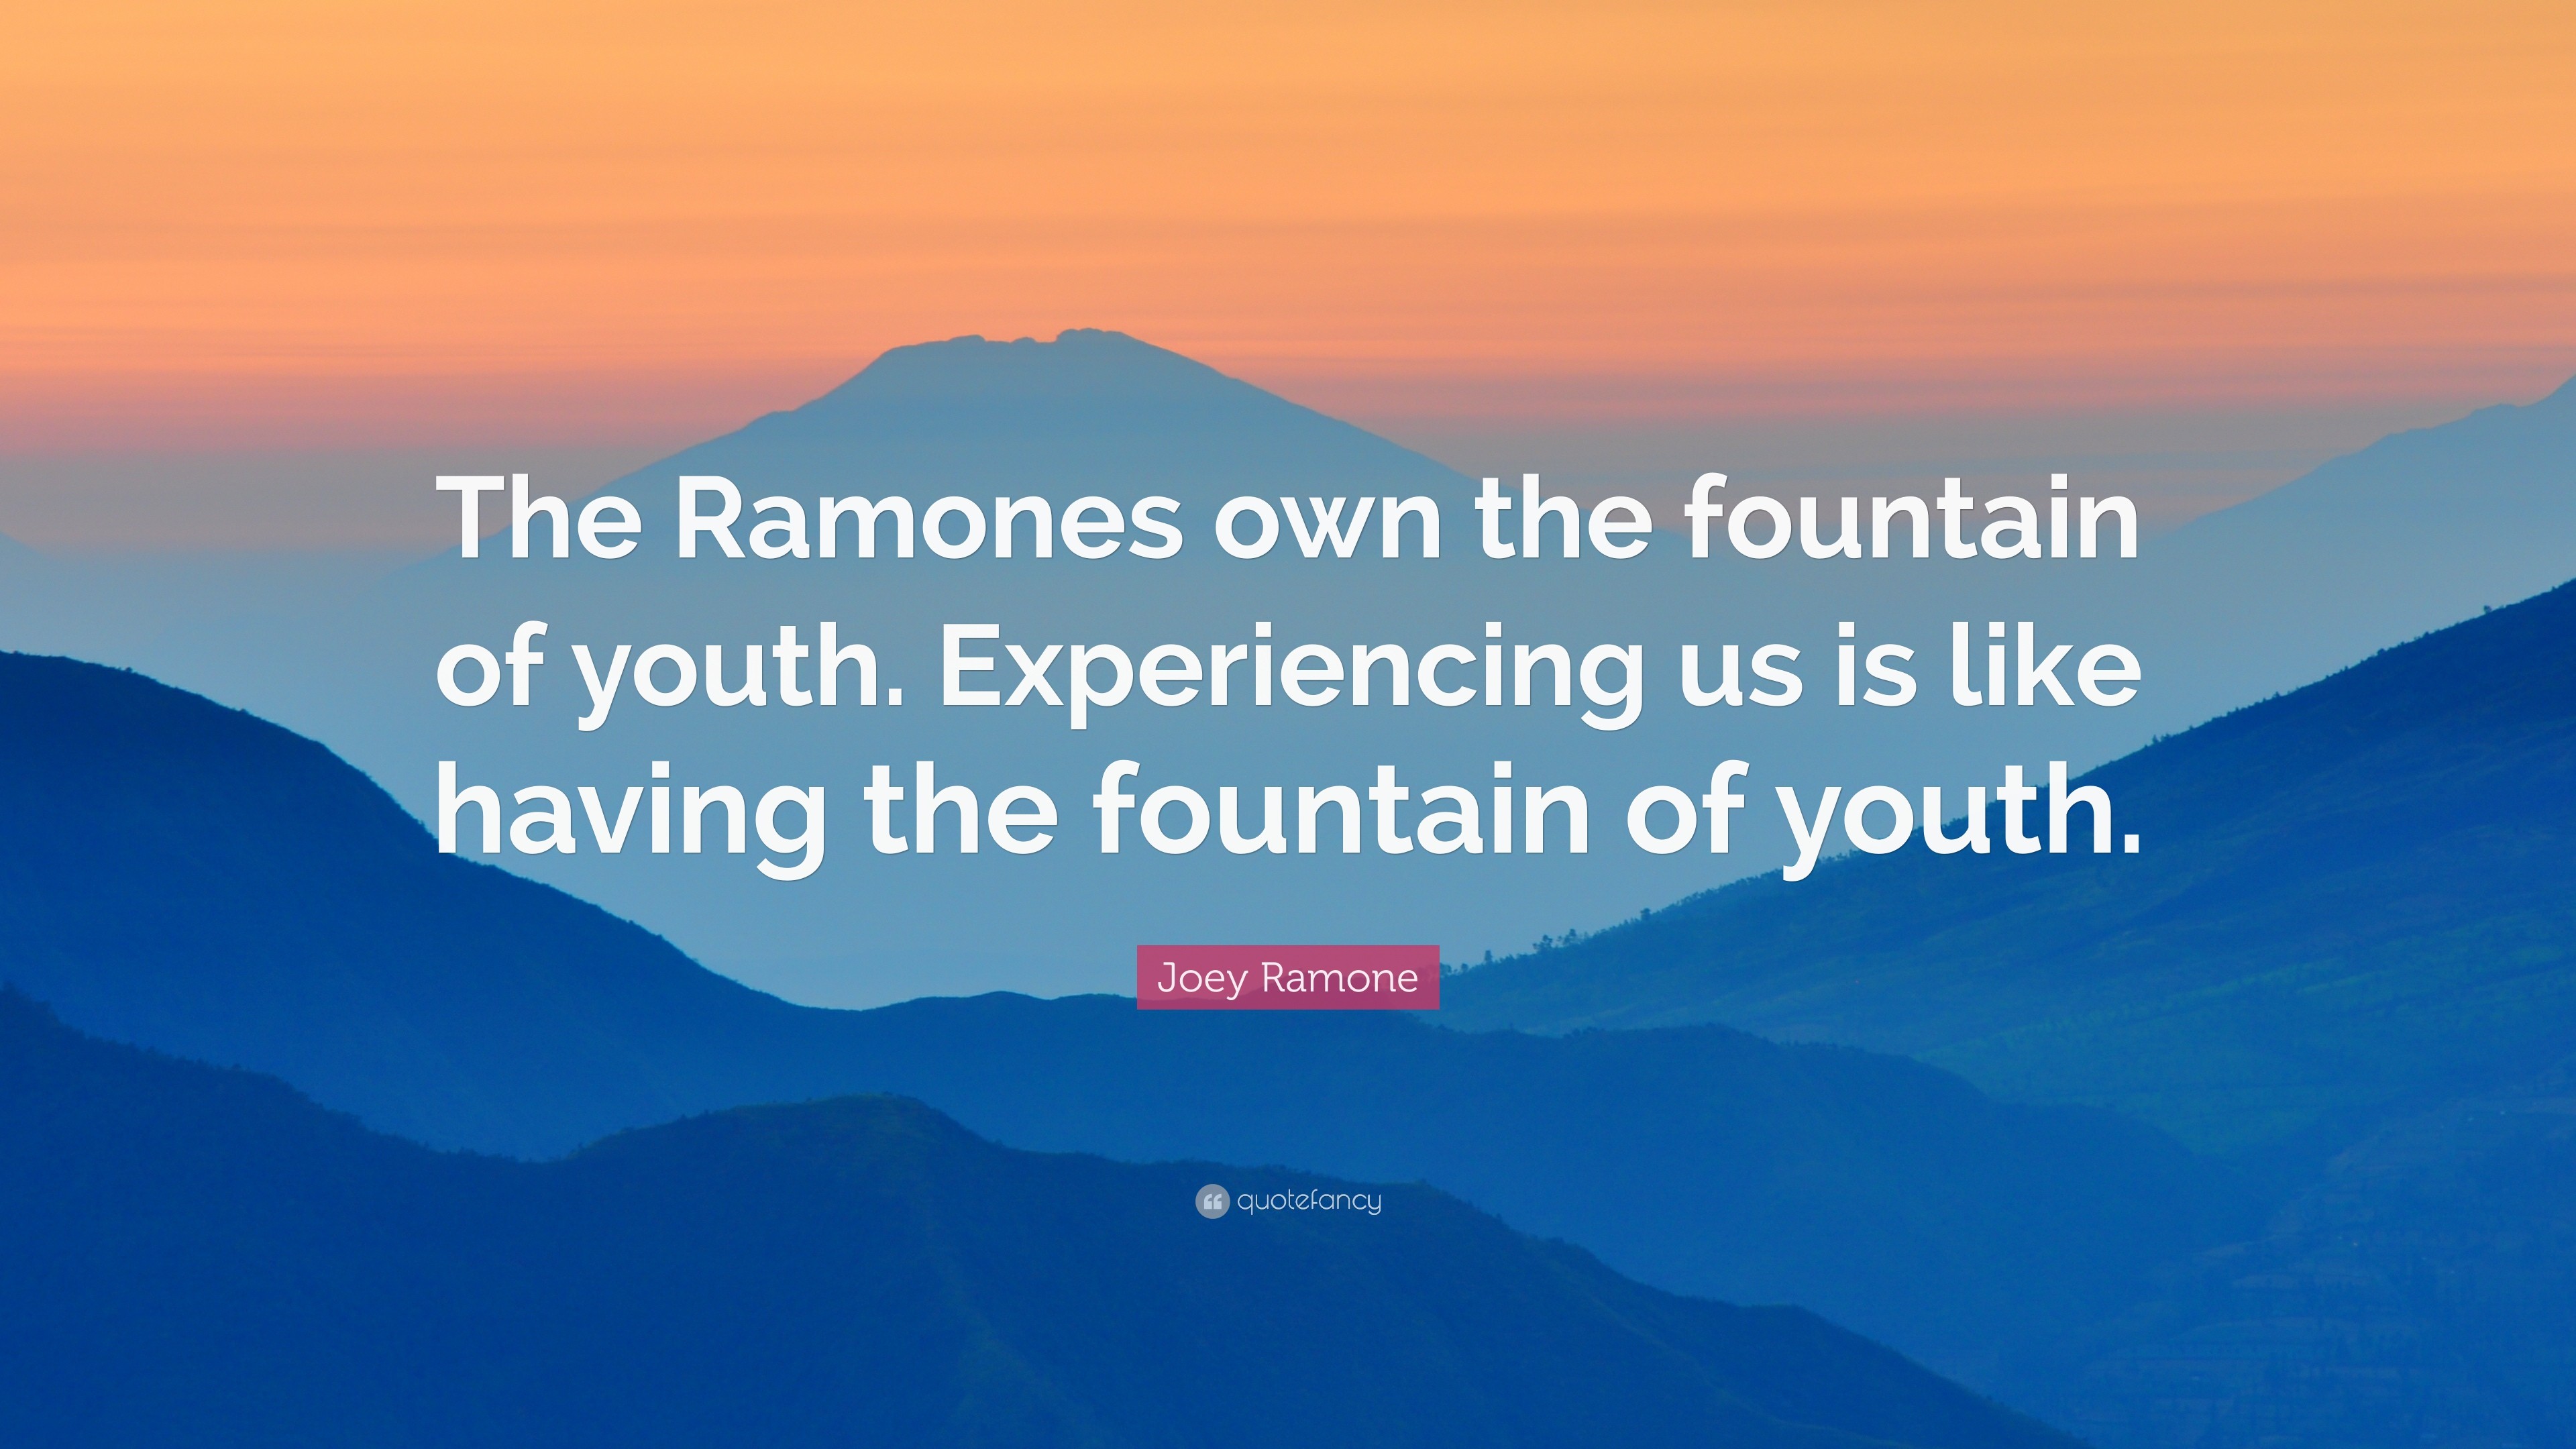 3840x2160 Joey Ramone Quote: “The Ramones own the fountain of youth. Experiencing us  is